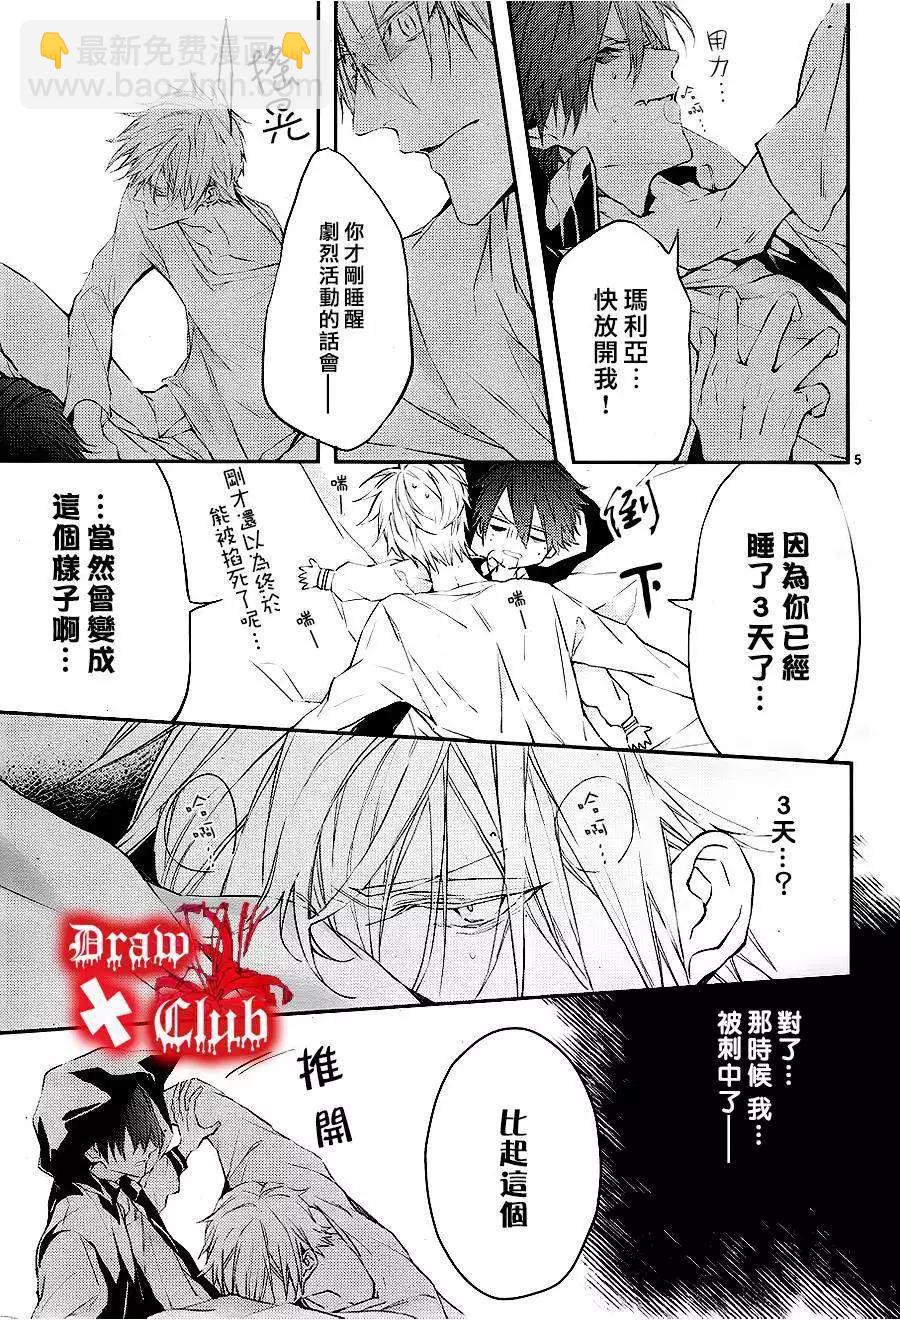 Bloody Mary - 第11回 - 6